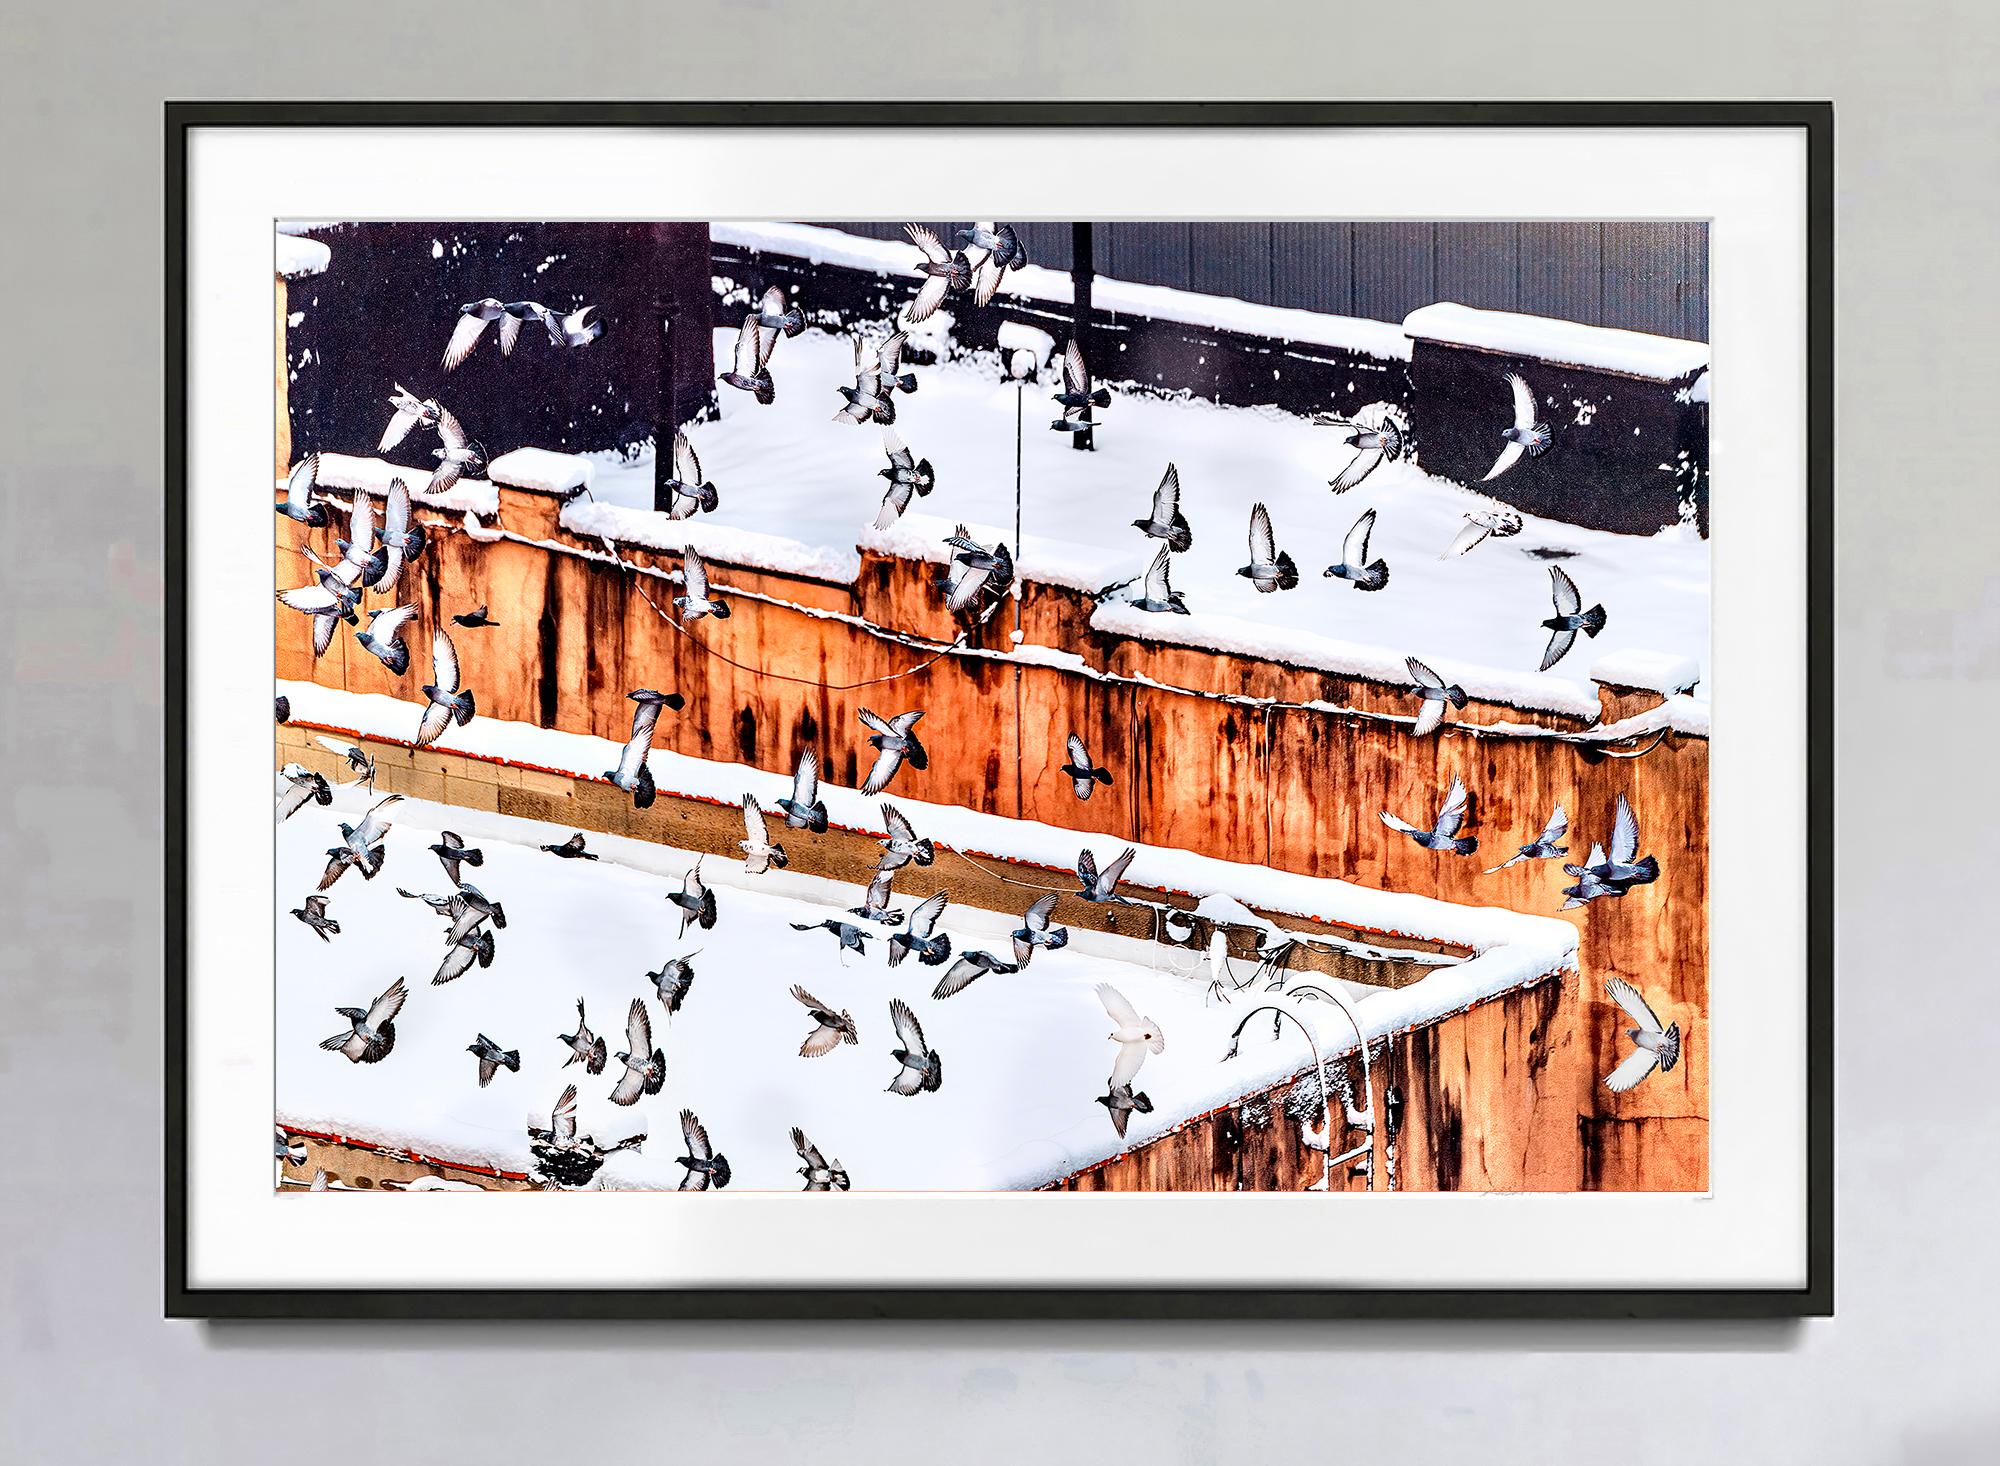  A flock of birds hovers above snow-covered Manhattan rooftops.  The image is as much about an overall composition in abstract art as it is a document of group avian behavior.  Signed, dated and numbered, 3/15 recto, unframed, printed later, other